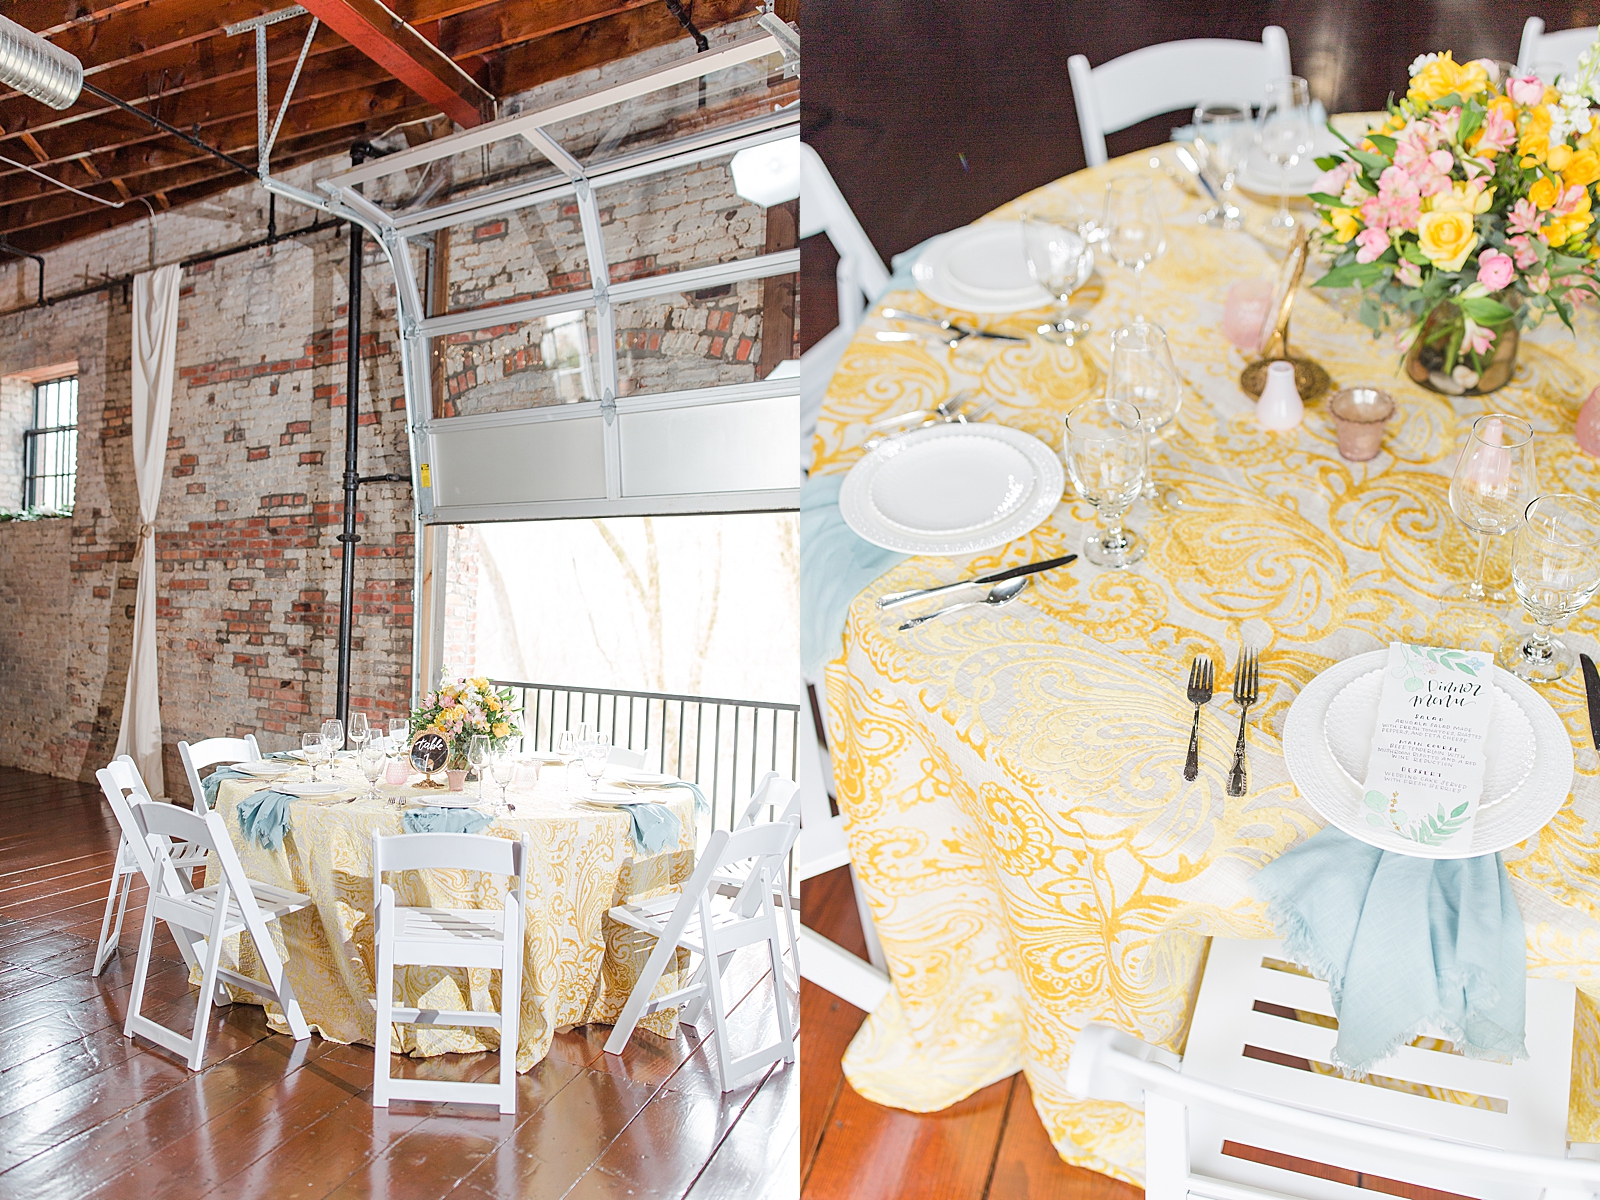 Hackney Warehouse Wedding Reception Table setting with yellow table cloths and blue napkins Photos